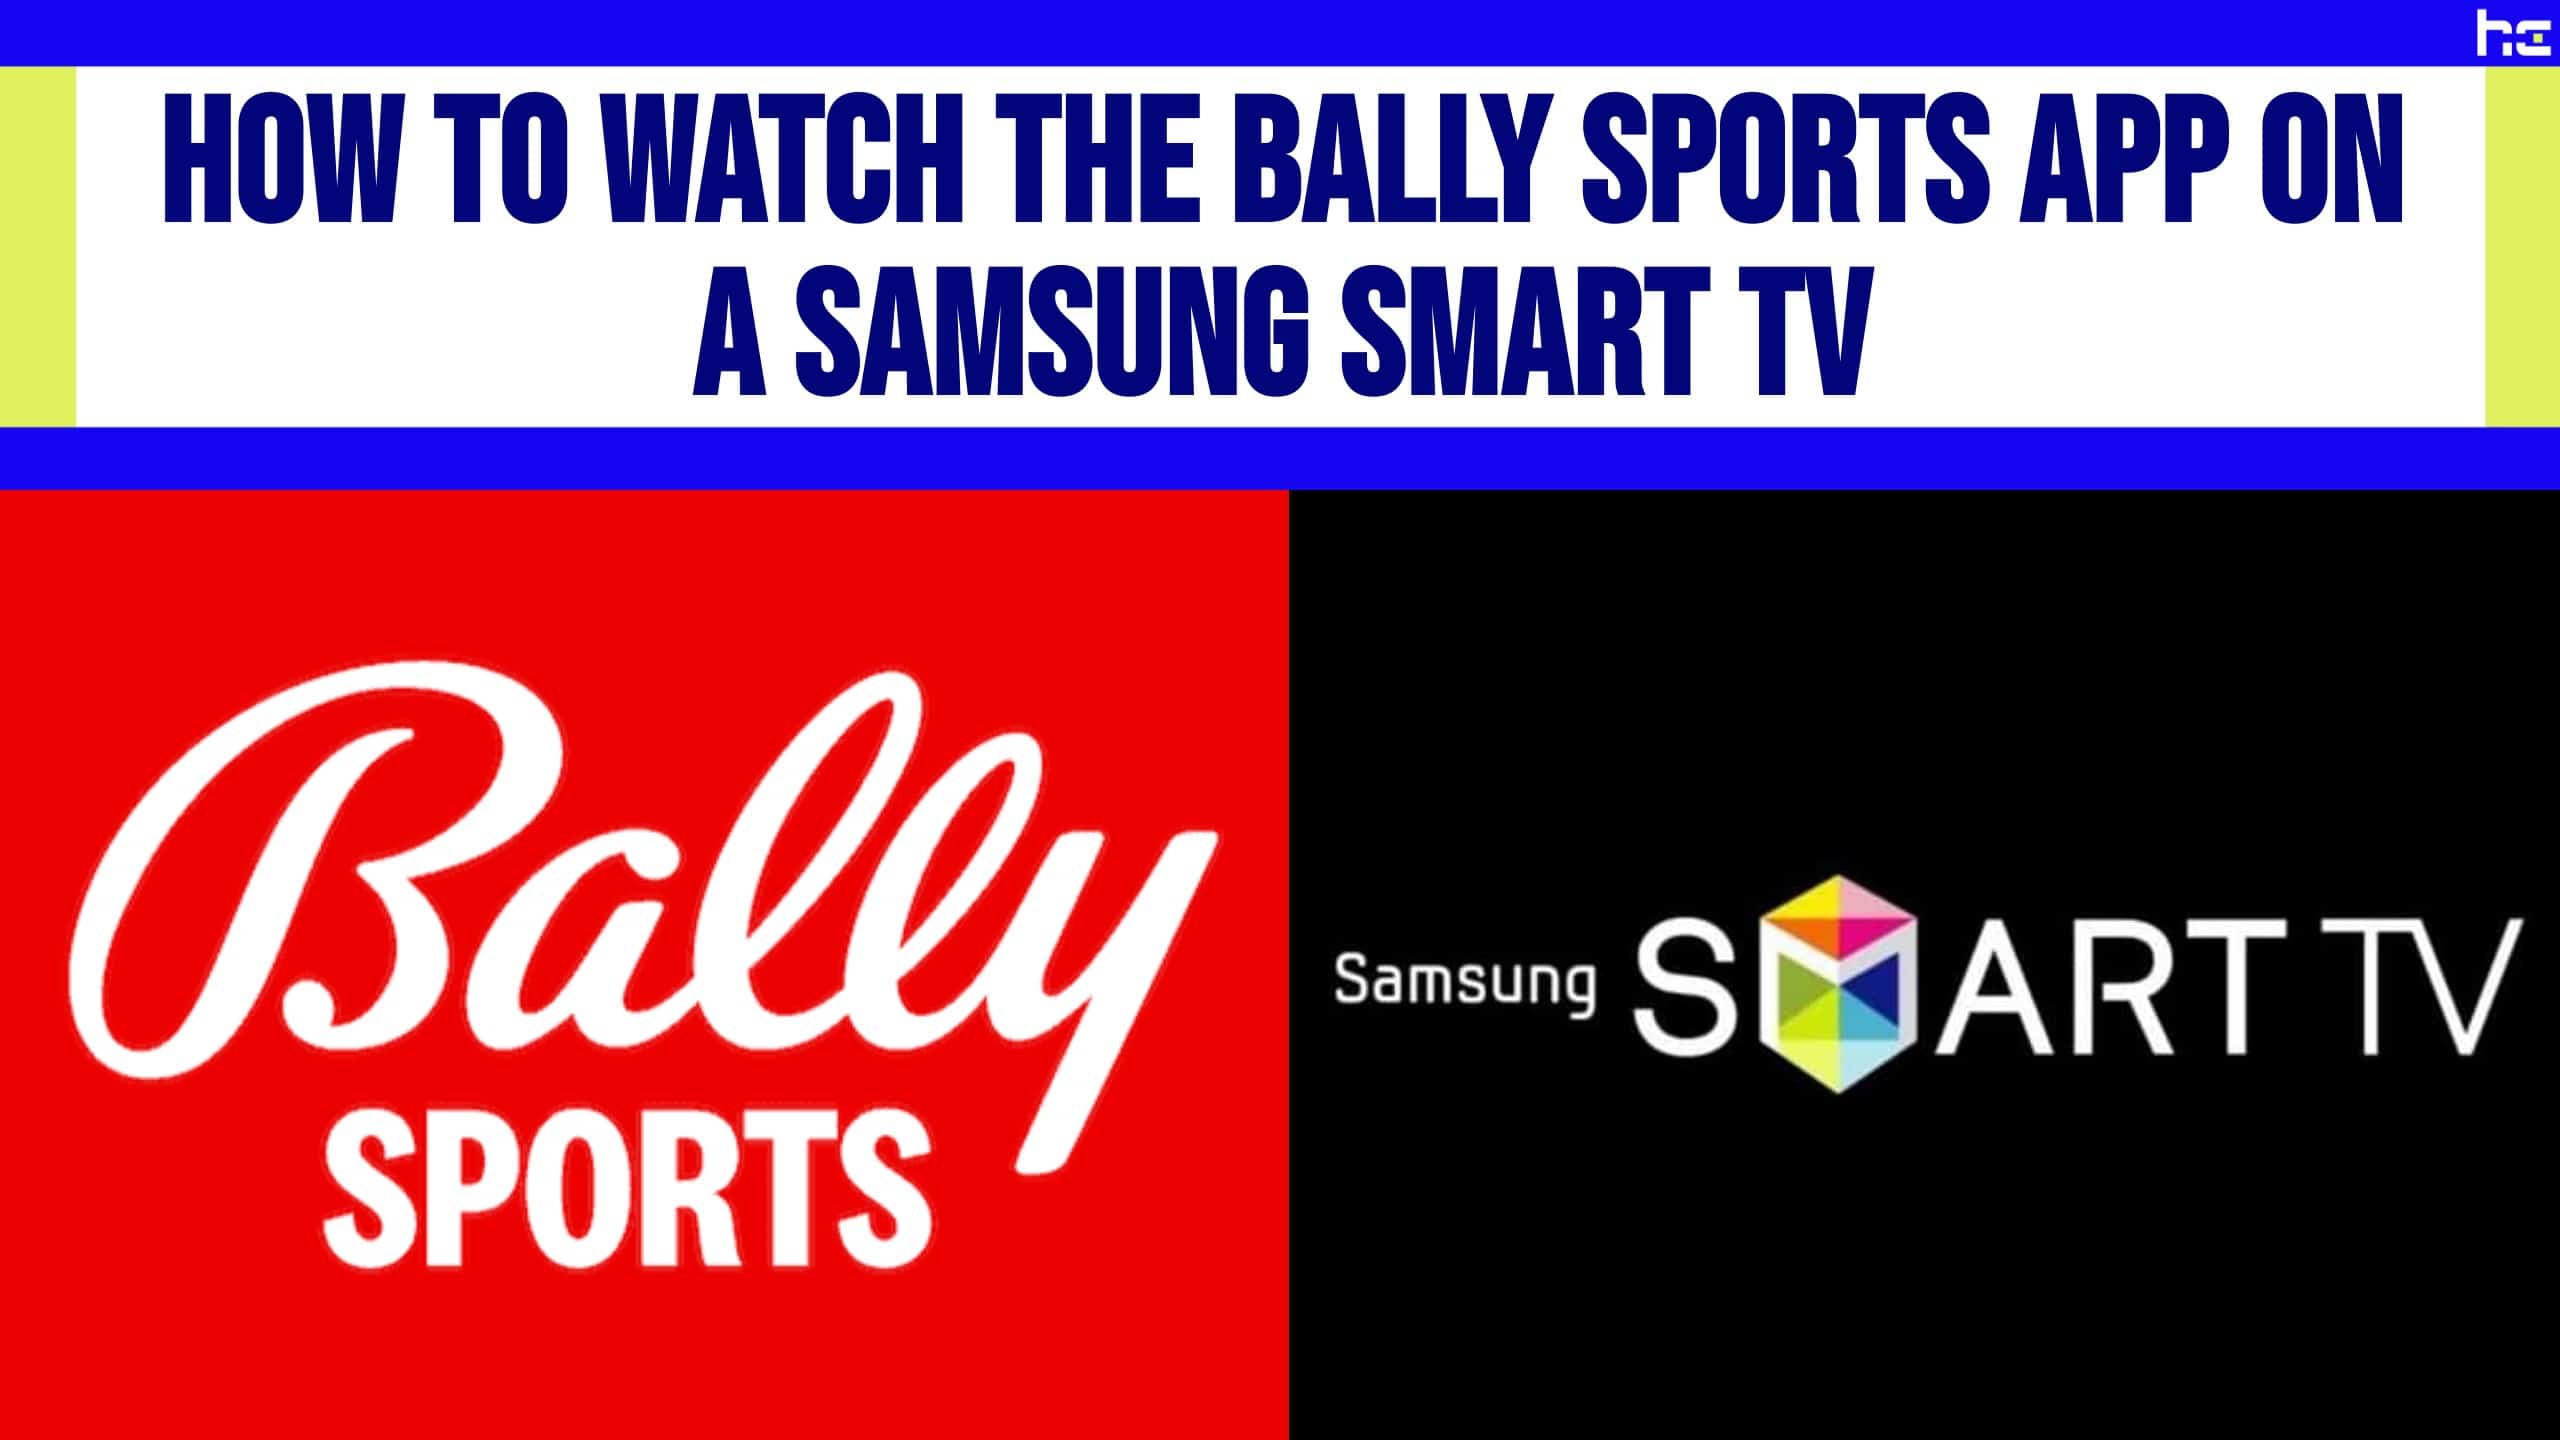 How to Watch the Bally Sports App on a Samsung Smart TV